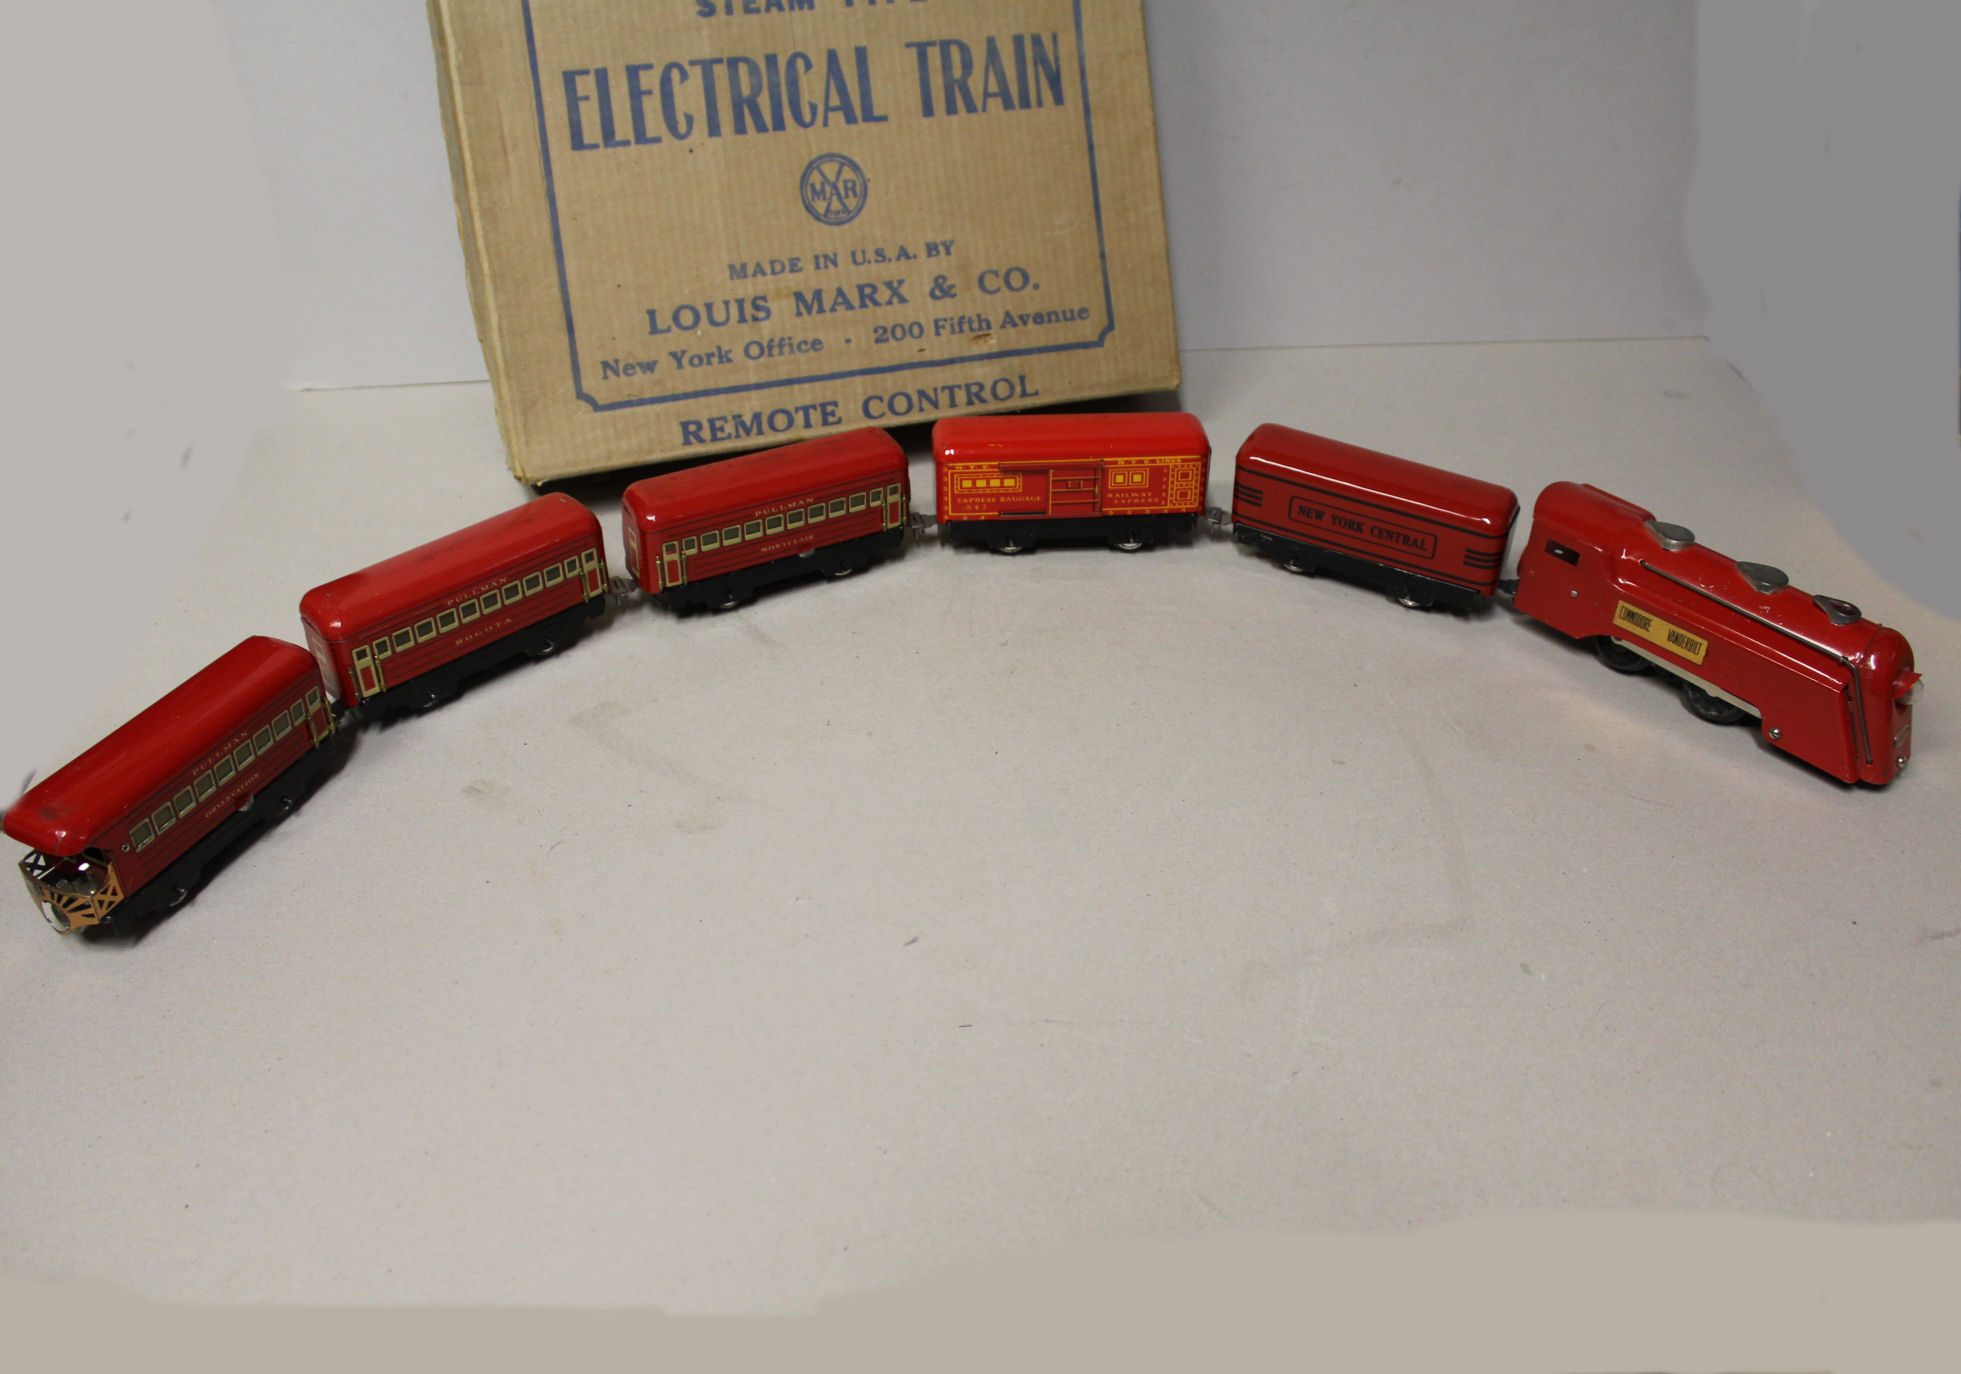 Details about   Stream Line Steam Type Electrical Train Remote Louis Marx & Co Mar Toys